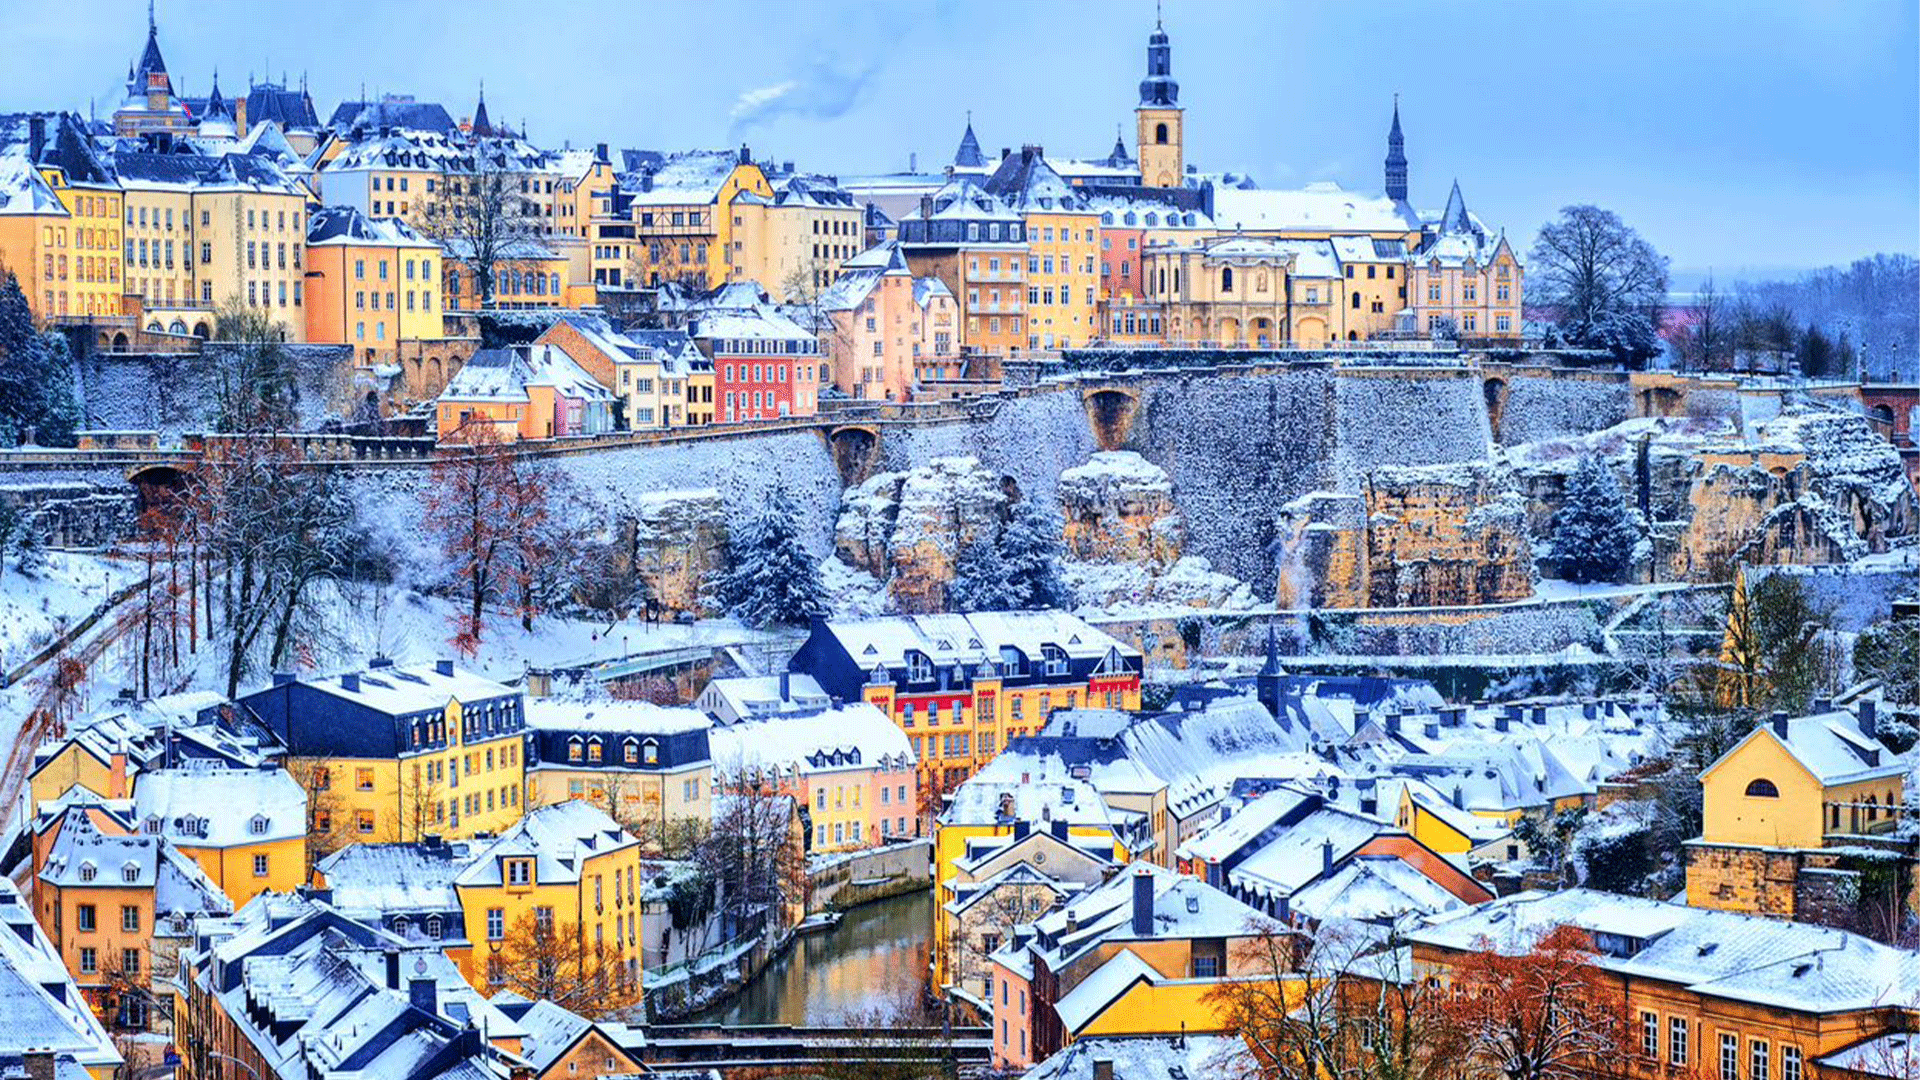 luxembourg-city-old-town-winter-snow